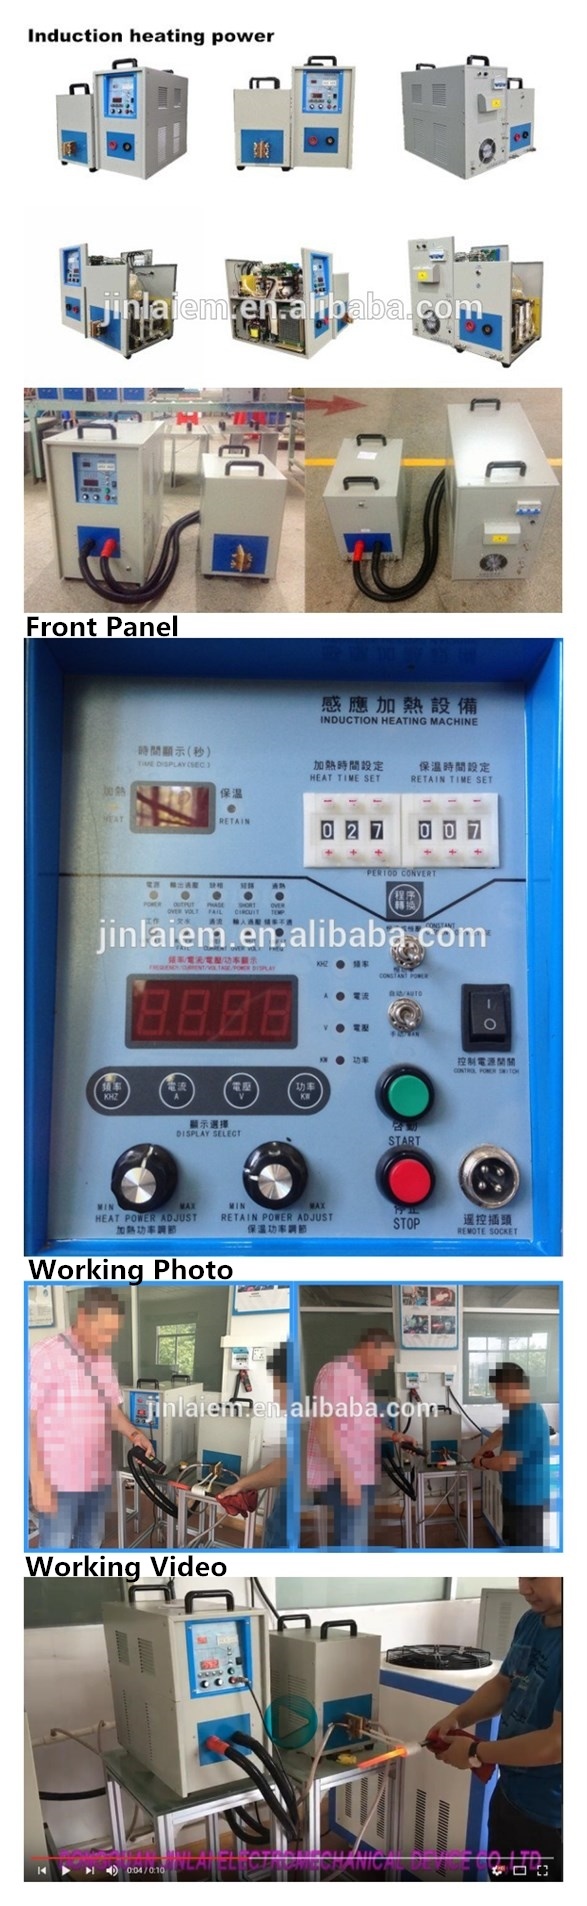 Portable High Frequency Low Price High Quality Induction Heating Equipment